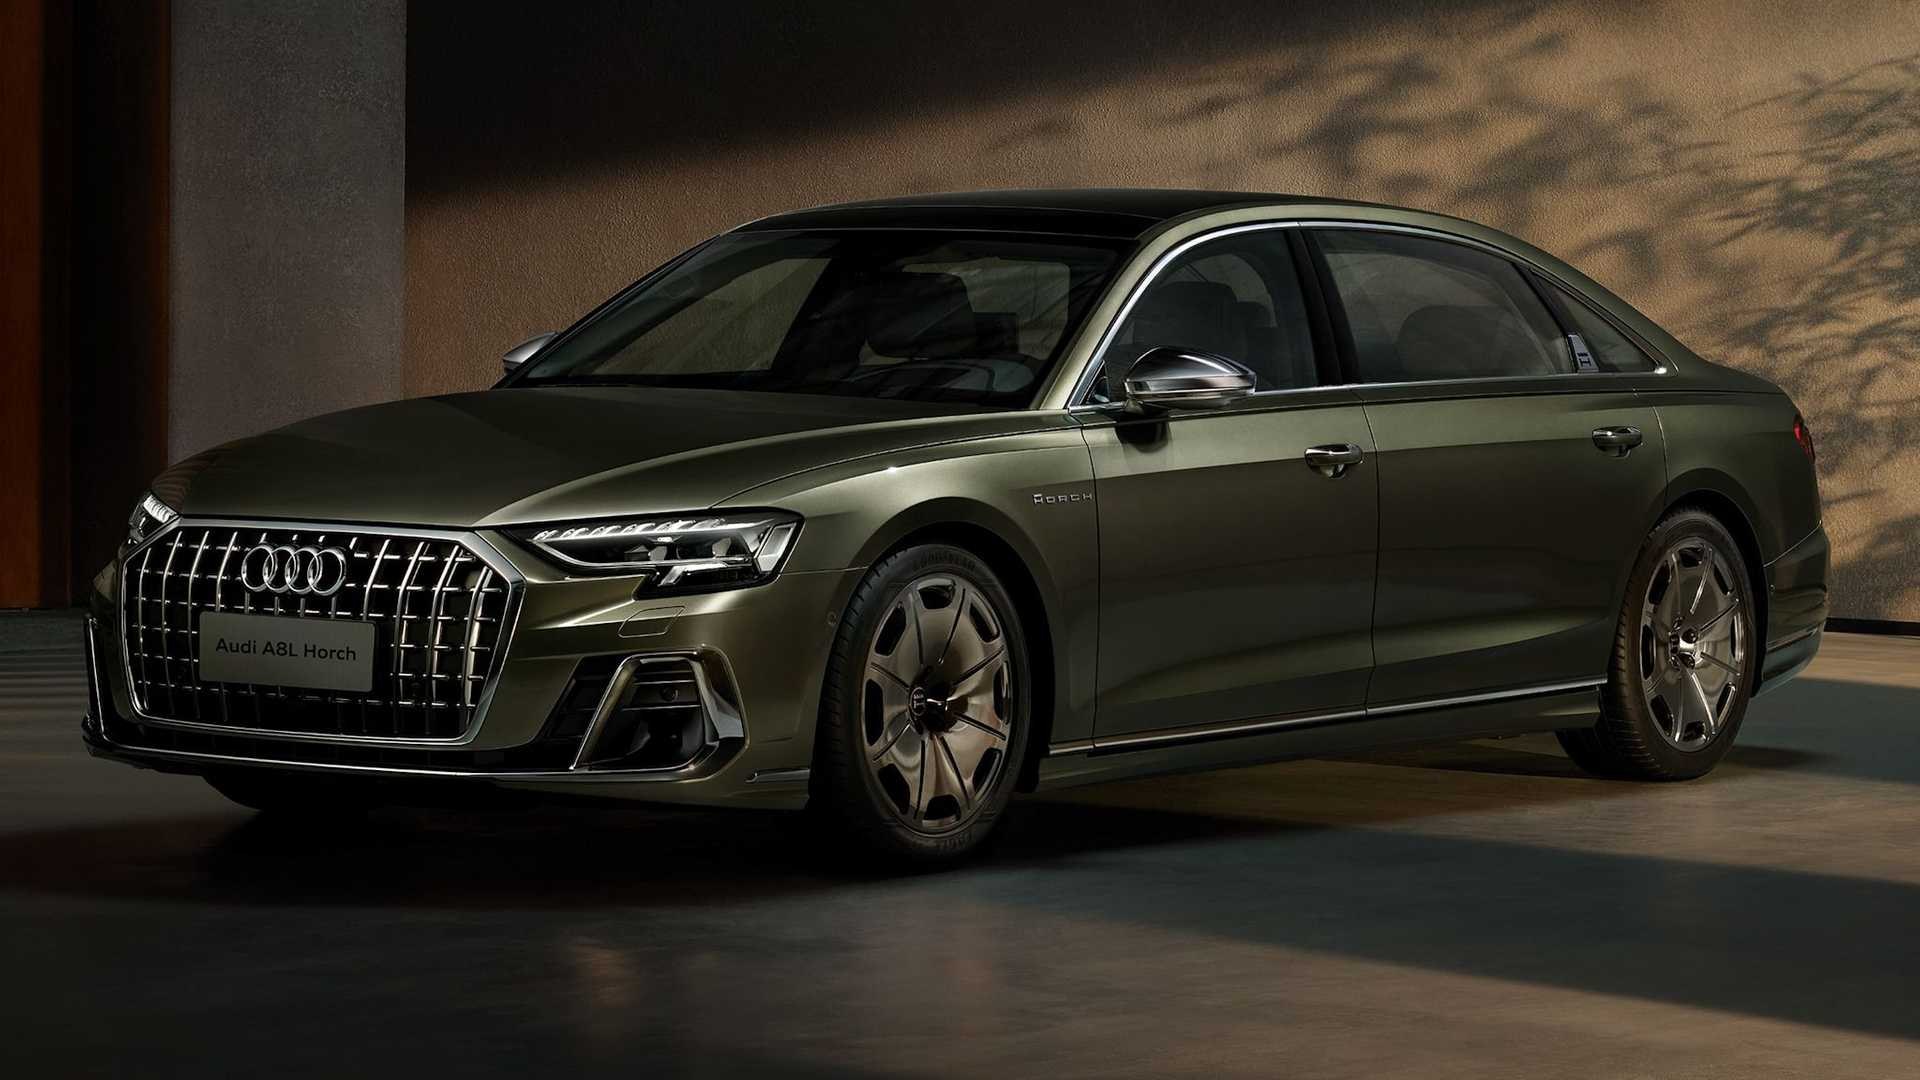 2022 Audi A8 L Horch Unveiled, Will Rival Mercedes-Maybach in China -  autoevolution